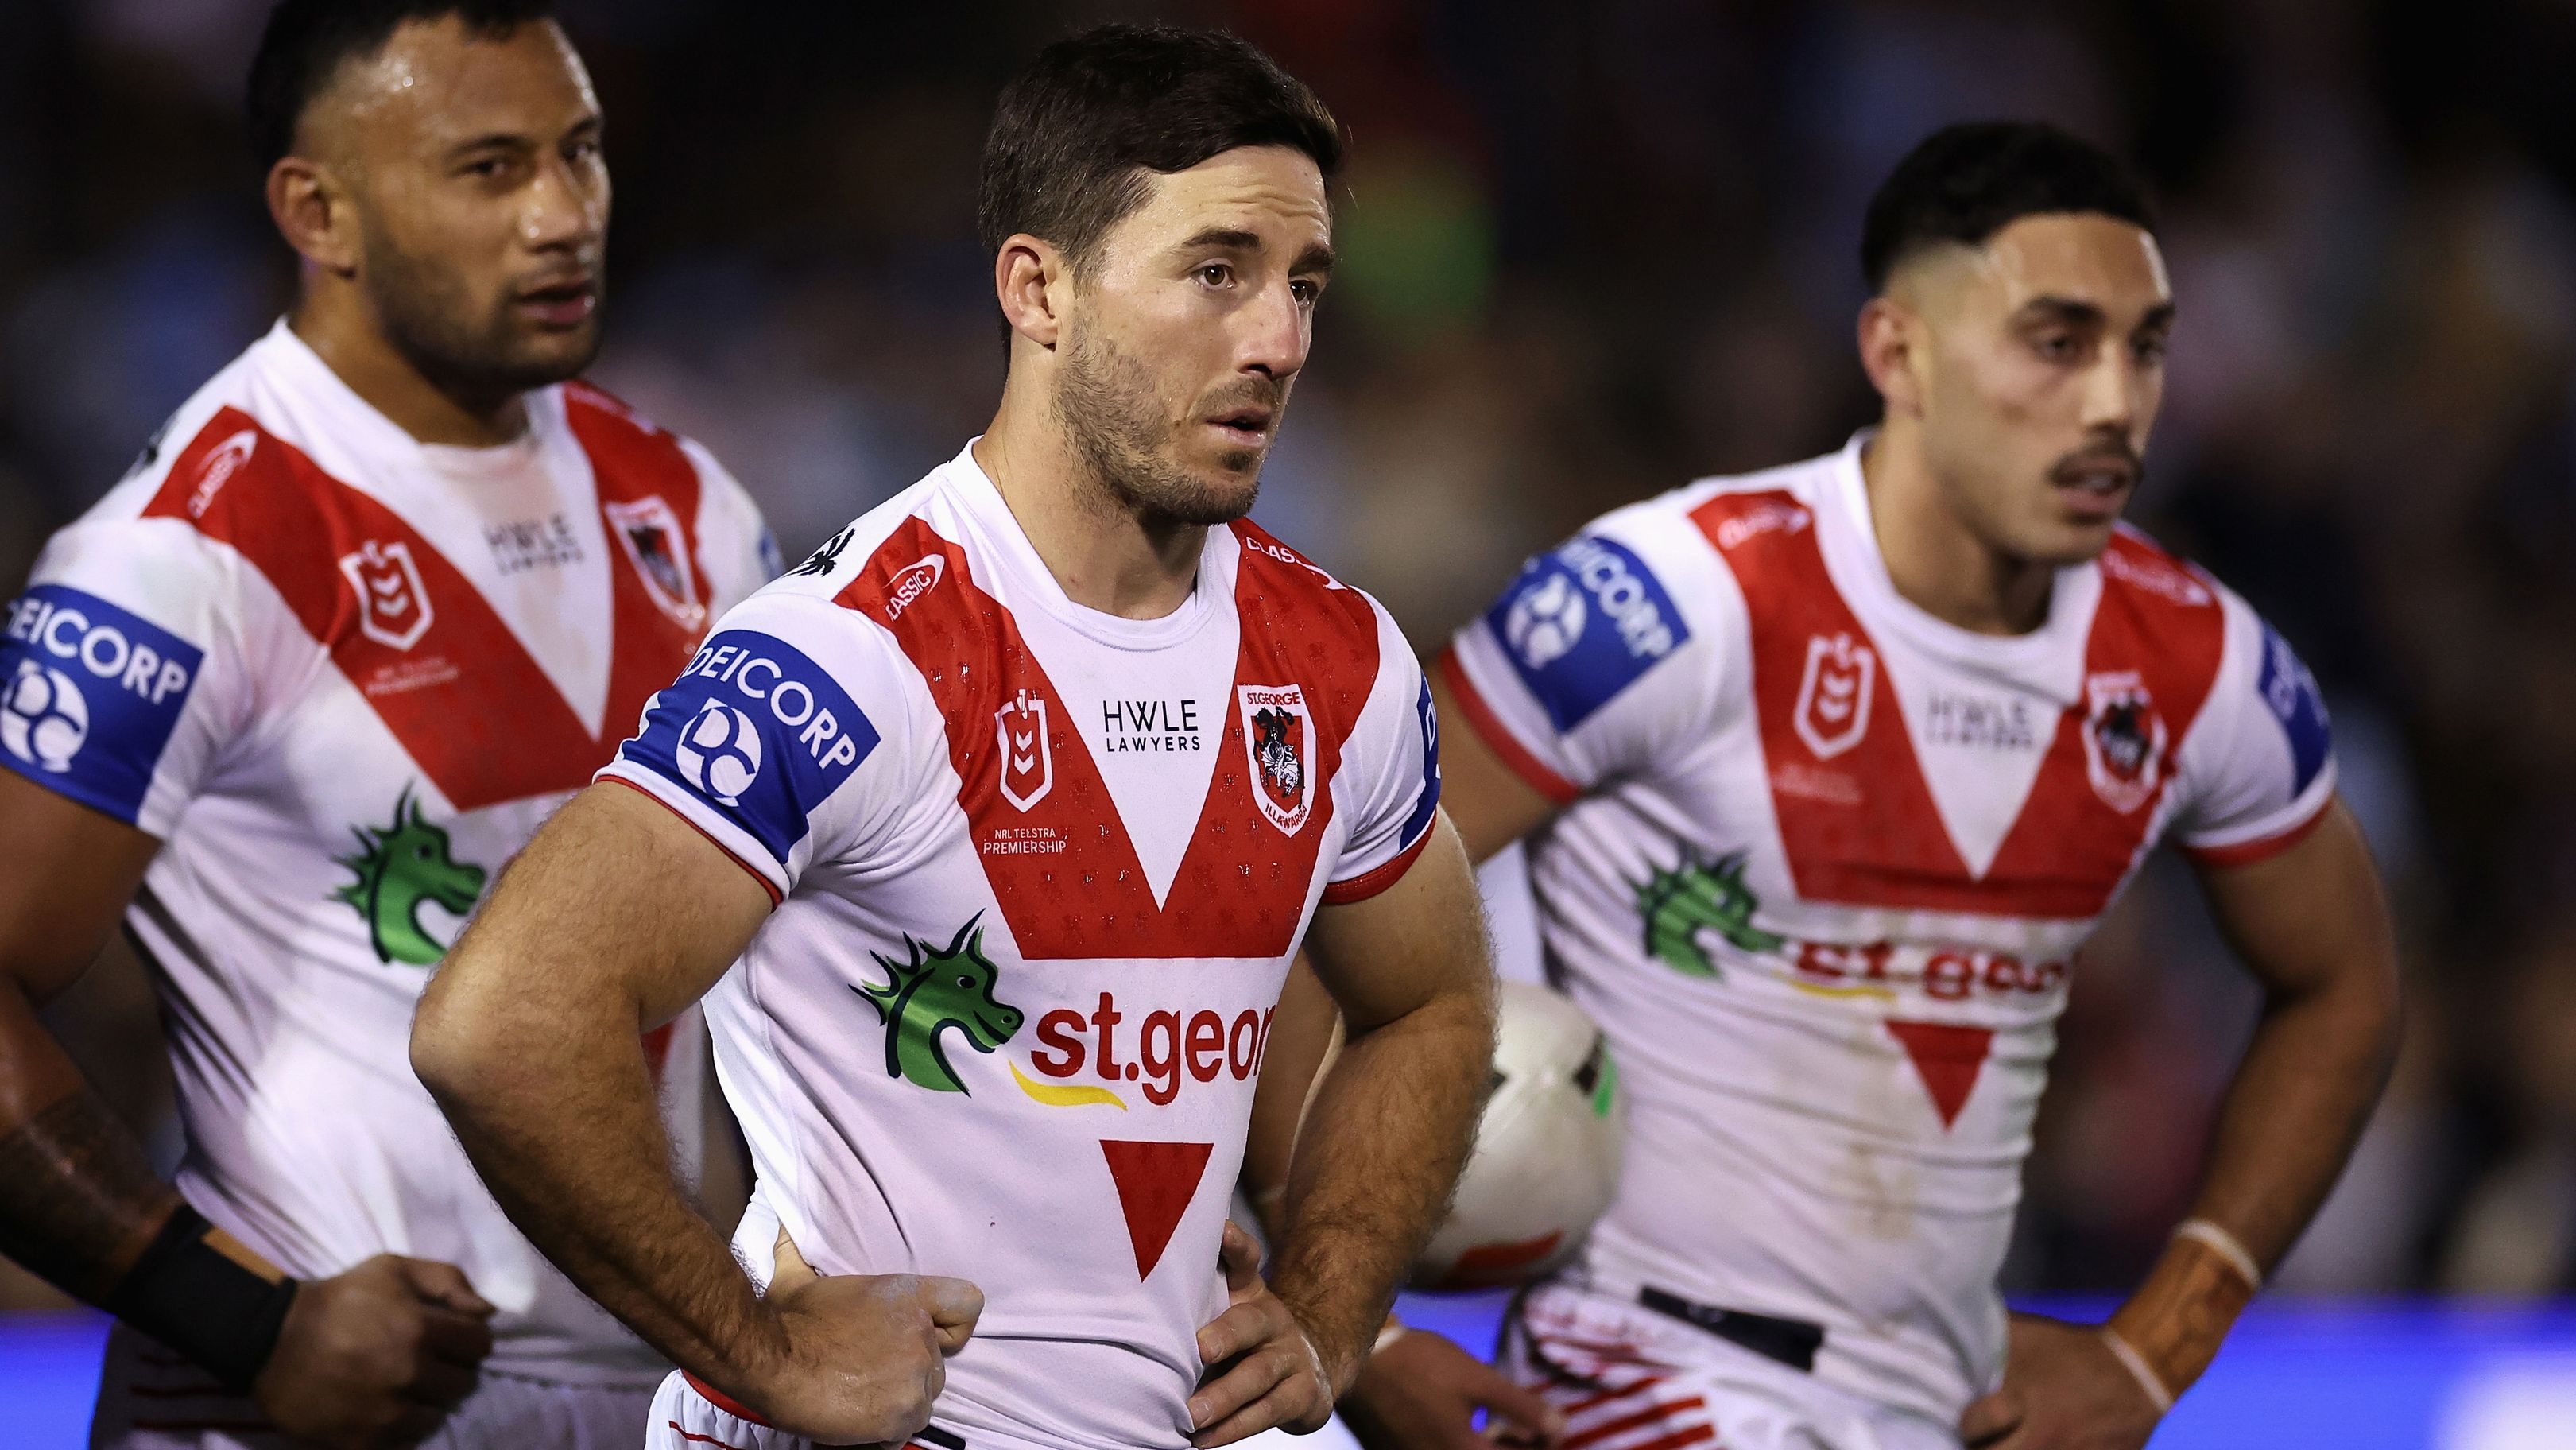 Ben Hunt of the Dragons and team mates look dejected after a Sharks try during the round 18 NRL match between Cronulla Sharks and St George Illawarra Dragons at PointsBet Stadium on June 29, 2023 in Sydney, Australia. (Photo by Cameron Spencer/Getty Images)